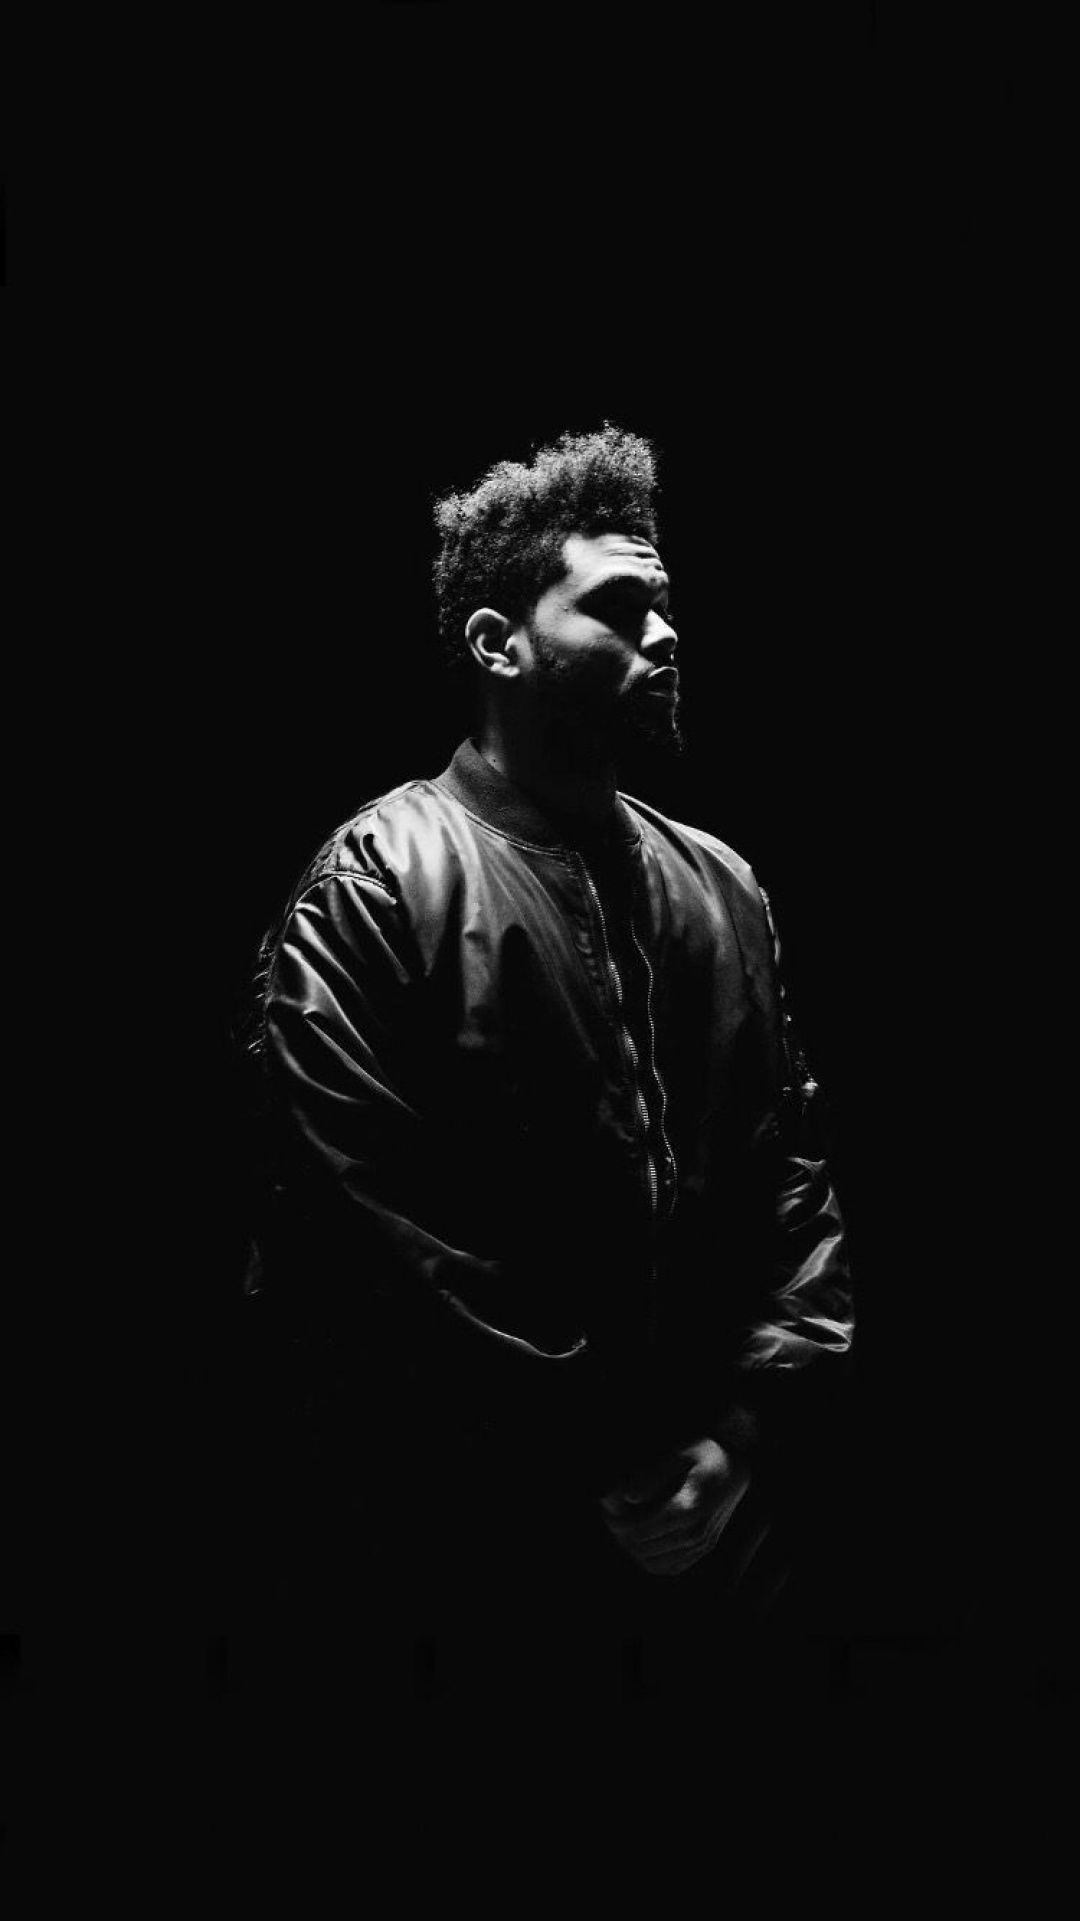 A man in black leather jacket standing alone - The Weeknd